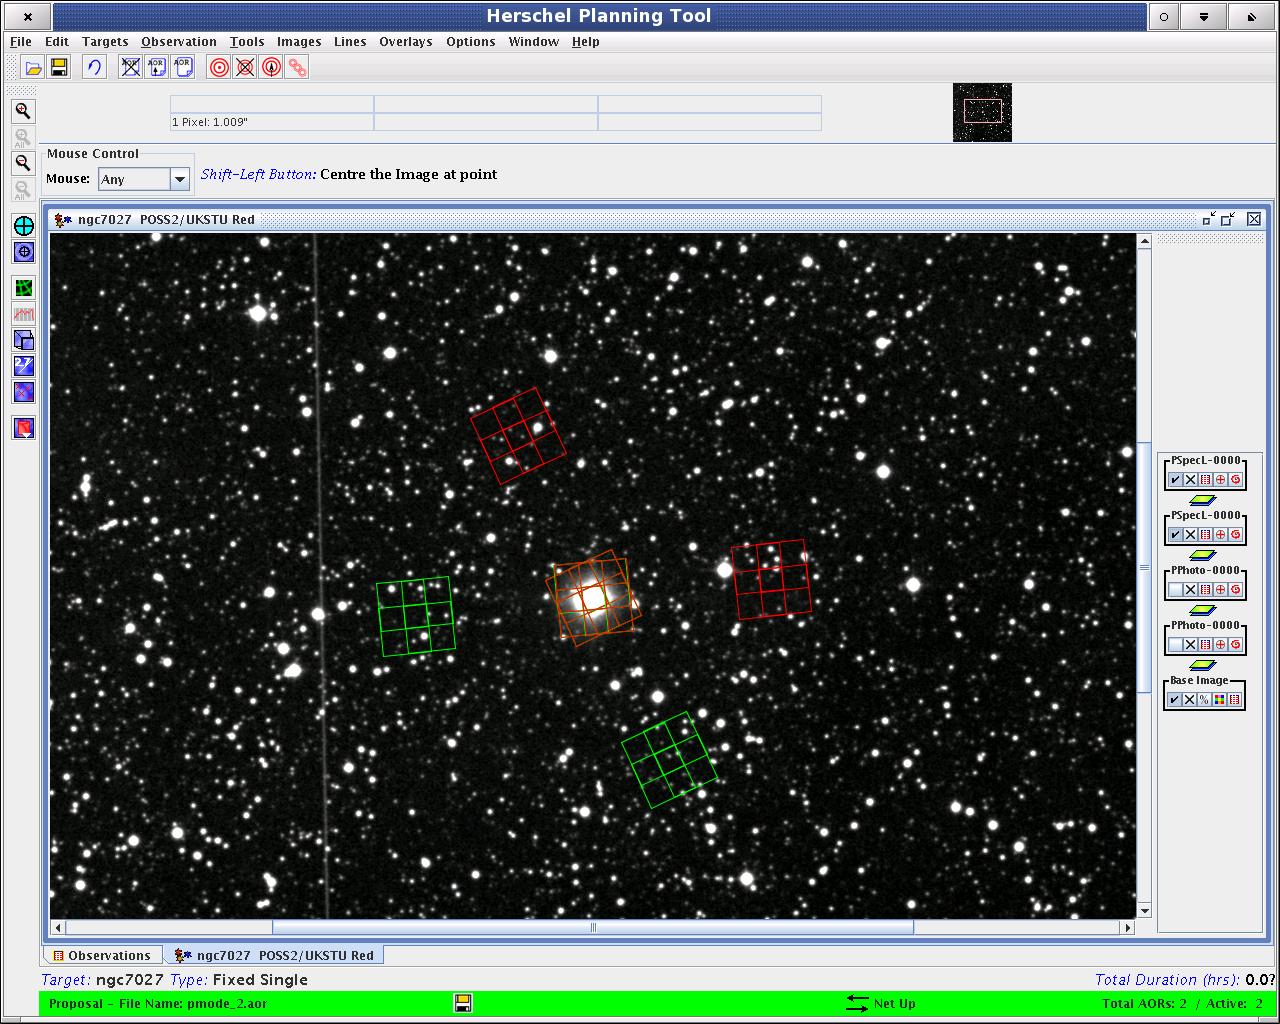 PACS Line Spectroscopy "Mapping" observation is shown overlaid on a DSS background image of NGC7027. The chopper off-positions are shown in red. The two footprints correspond to the beginning and end of the object visibility window.